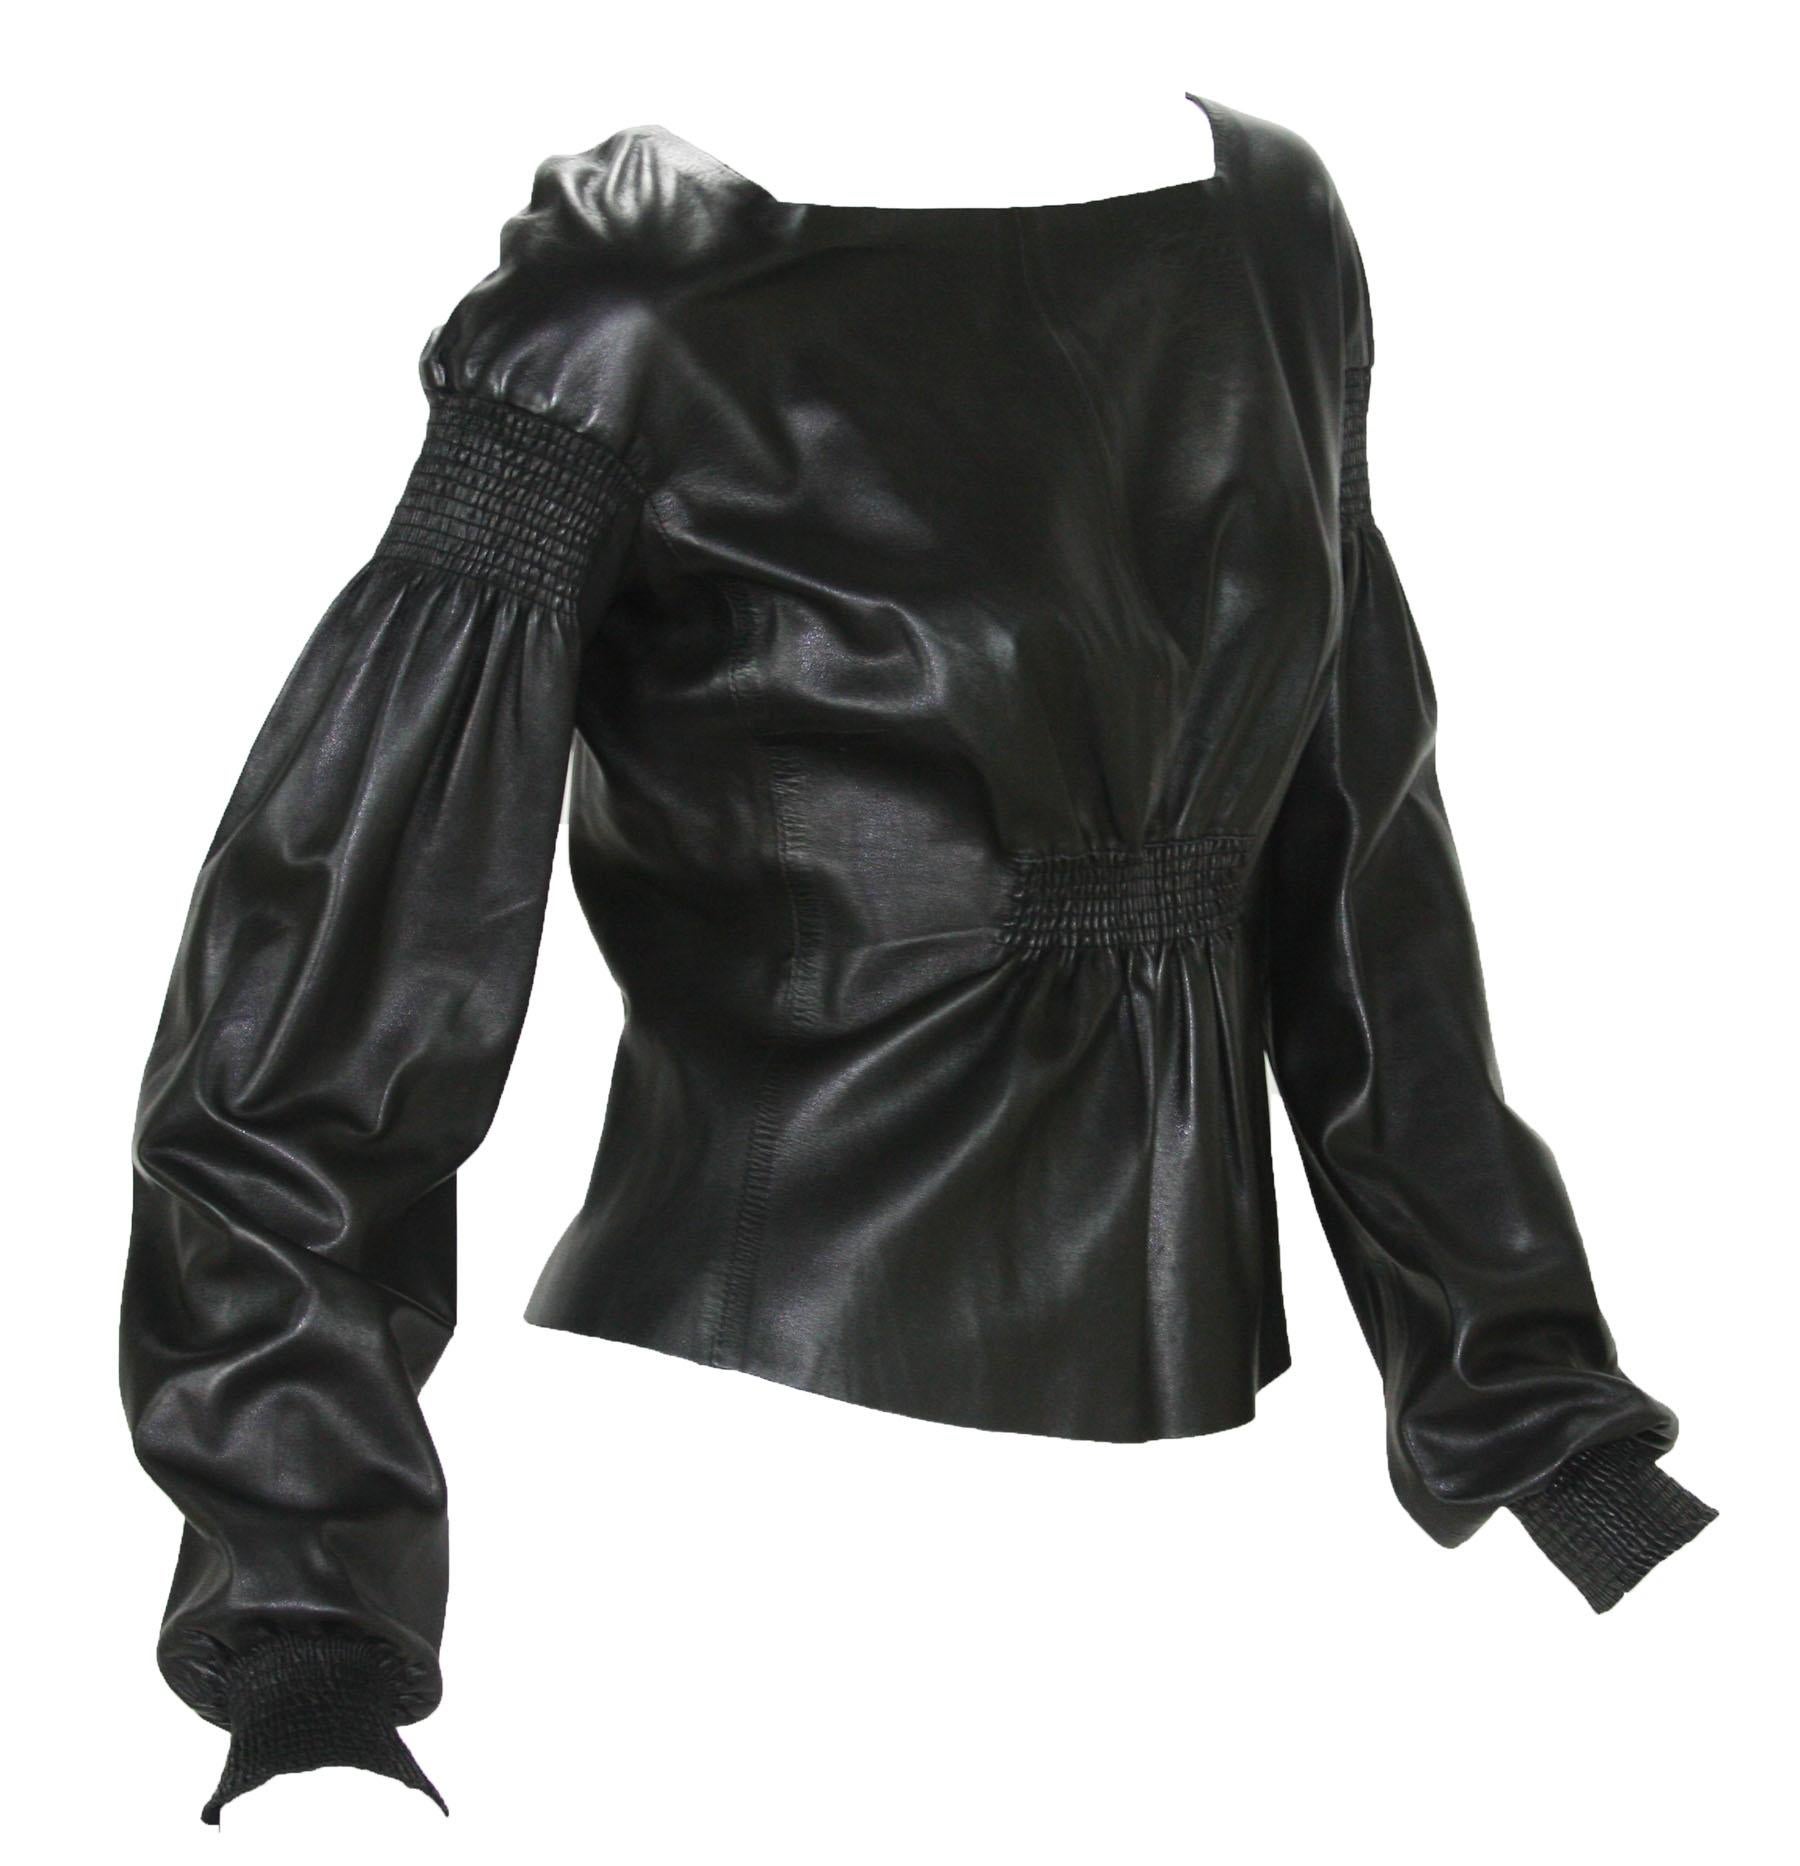 Tom Ford for Gucci Black Leather Top
F/W 1999 Runway Collection
Designer size - 42
Super soft leather, square neck line, back zip closure.
Made in Italy
Excellent vintage condition.